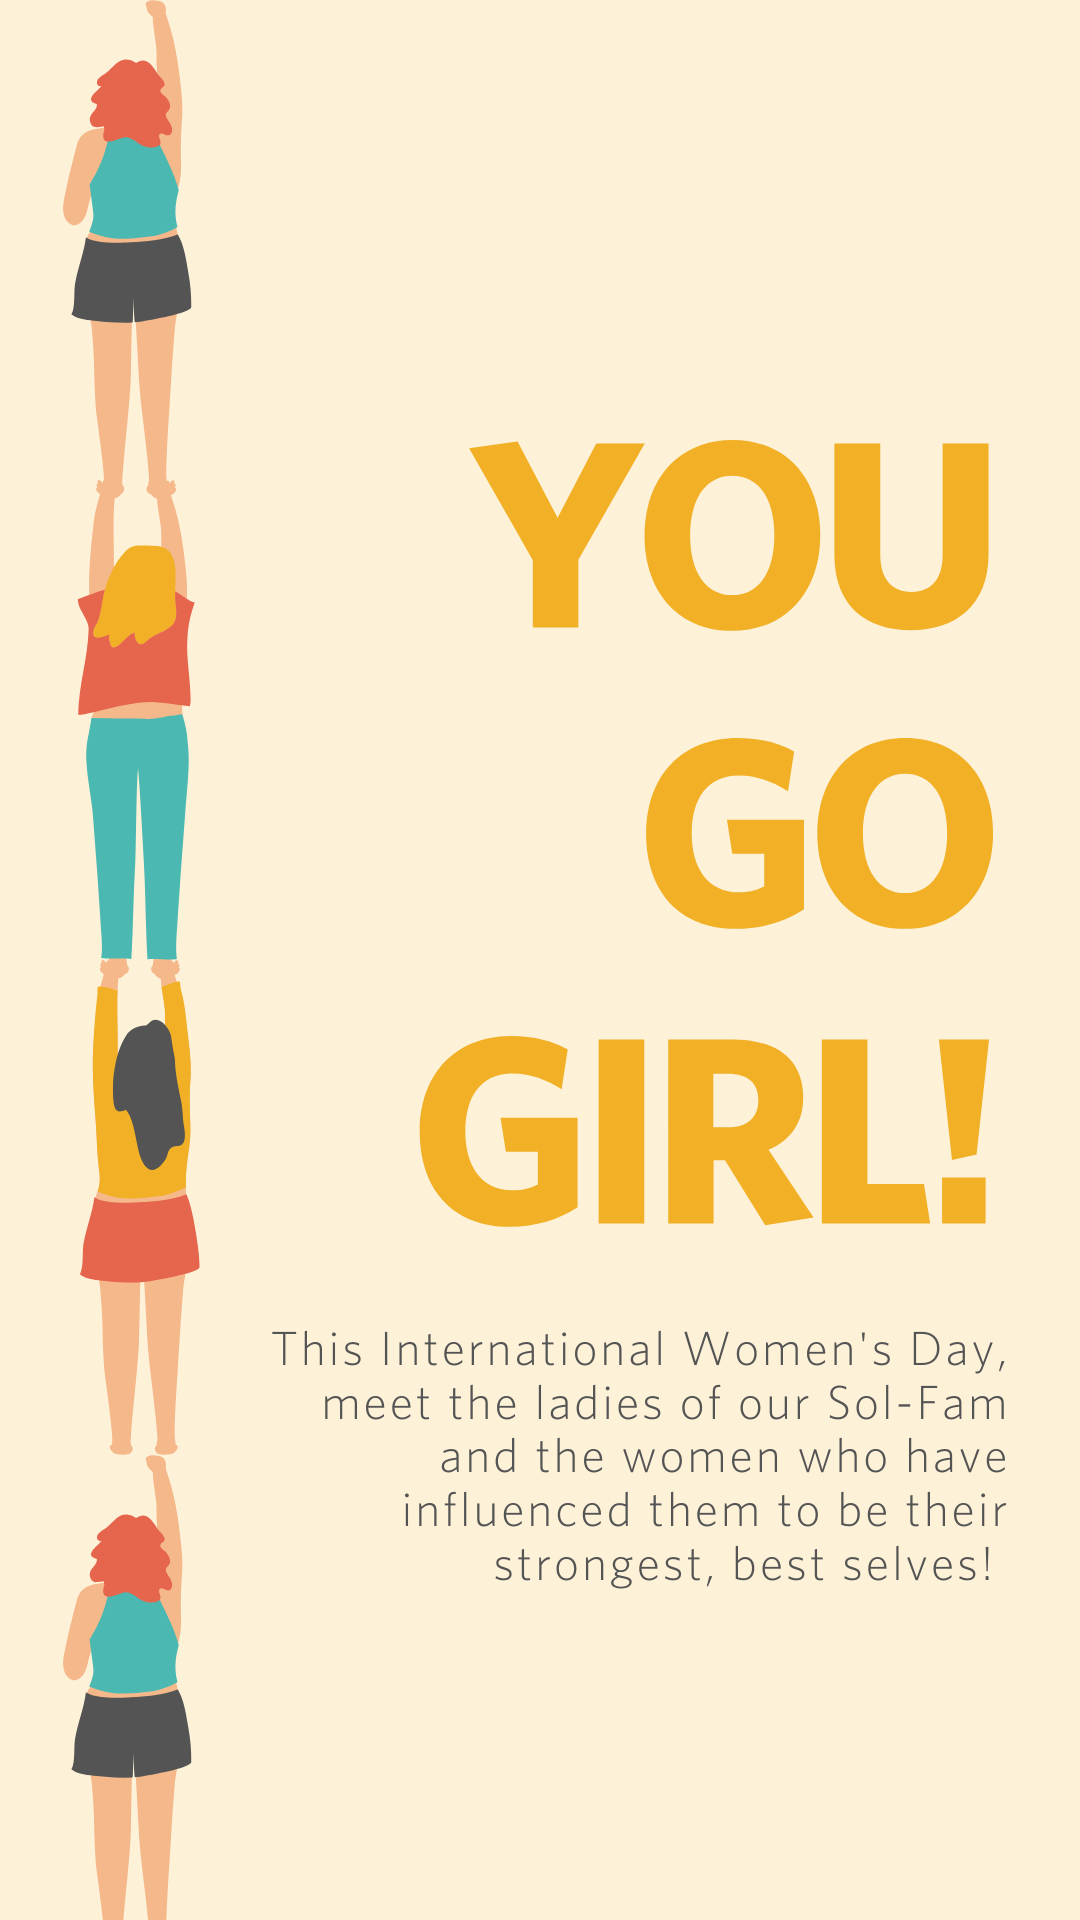 YOU GO GIRL! This International Women's Day, meet the ladies of our Sol-Fam andthe women who have influenced them to be their strongest, best selves!